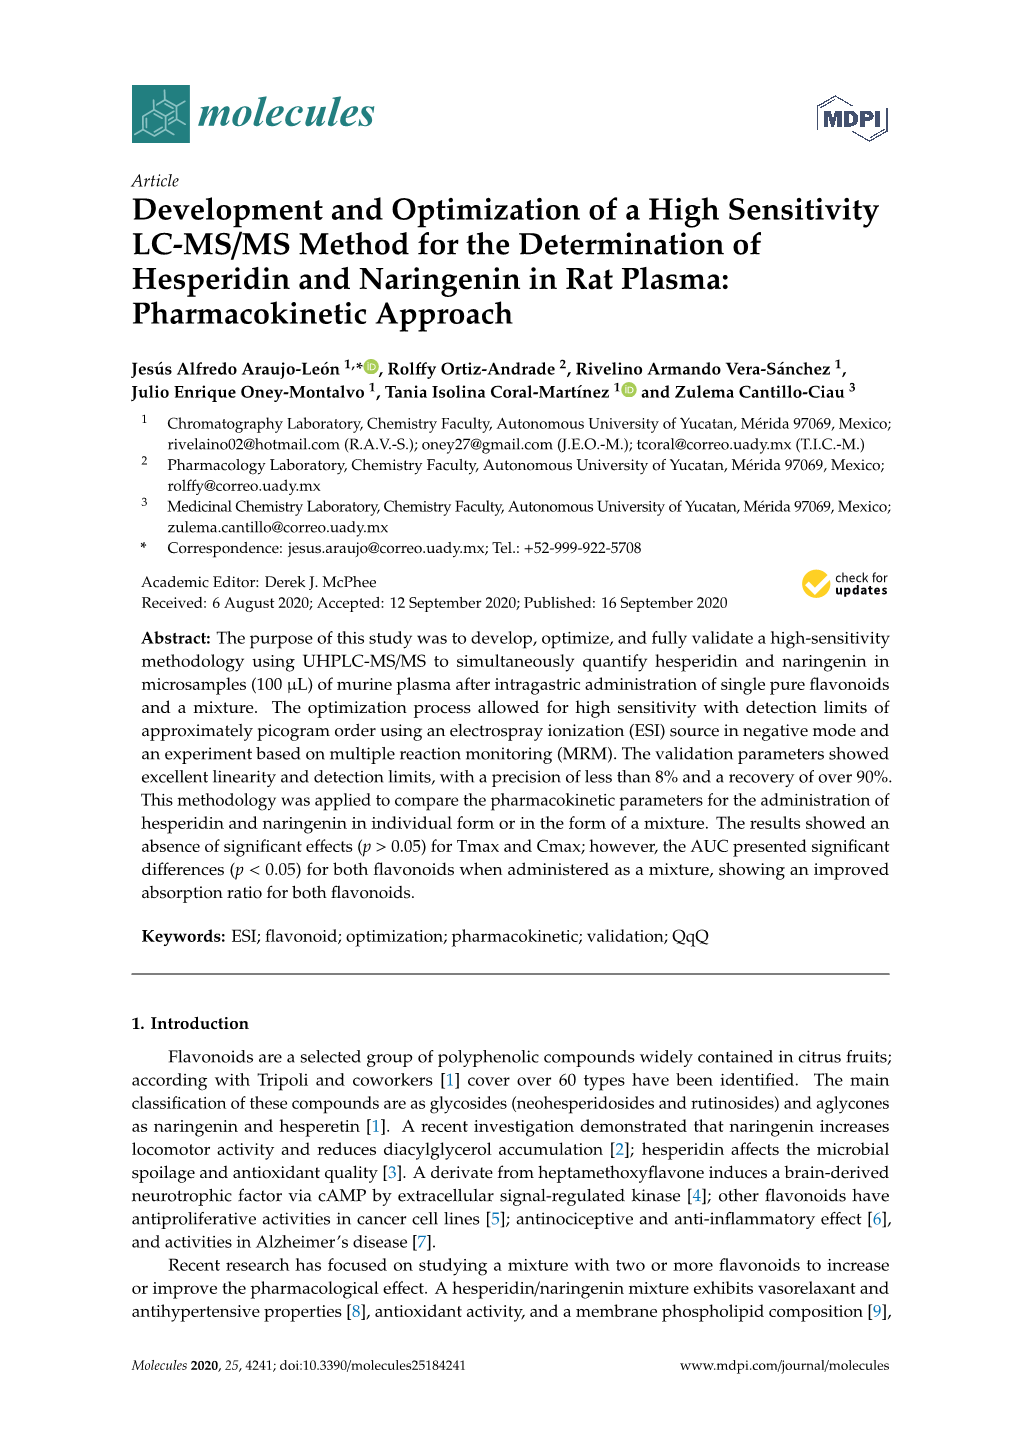 Development and Optimization of a High Sensitivity LC-MS/MS Method for the Determination of Hesperidin and Naringenin in Rat Plasma: Pharmacokinetic Approach